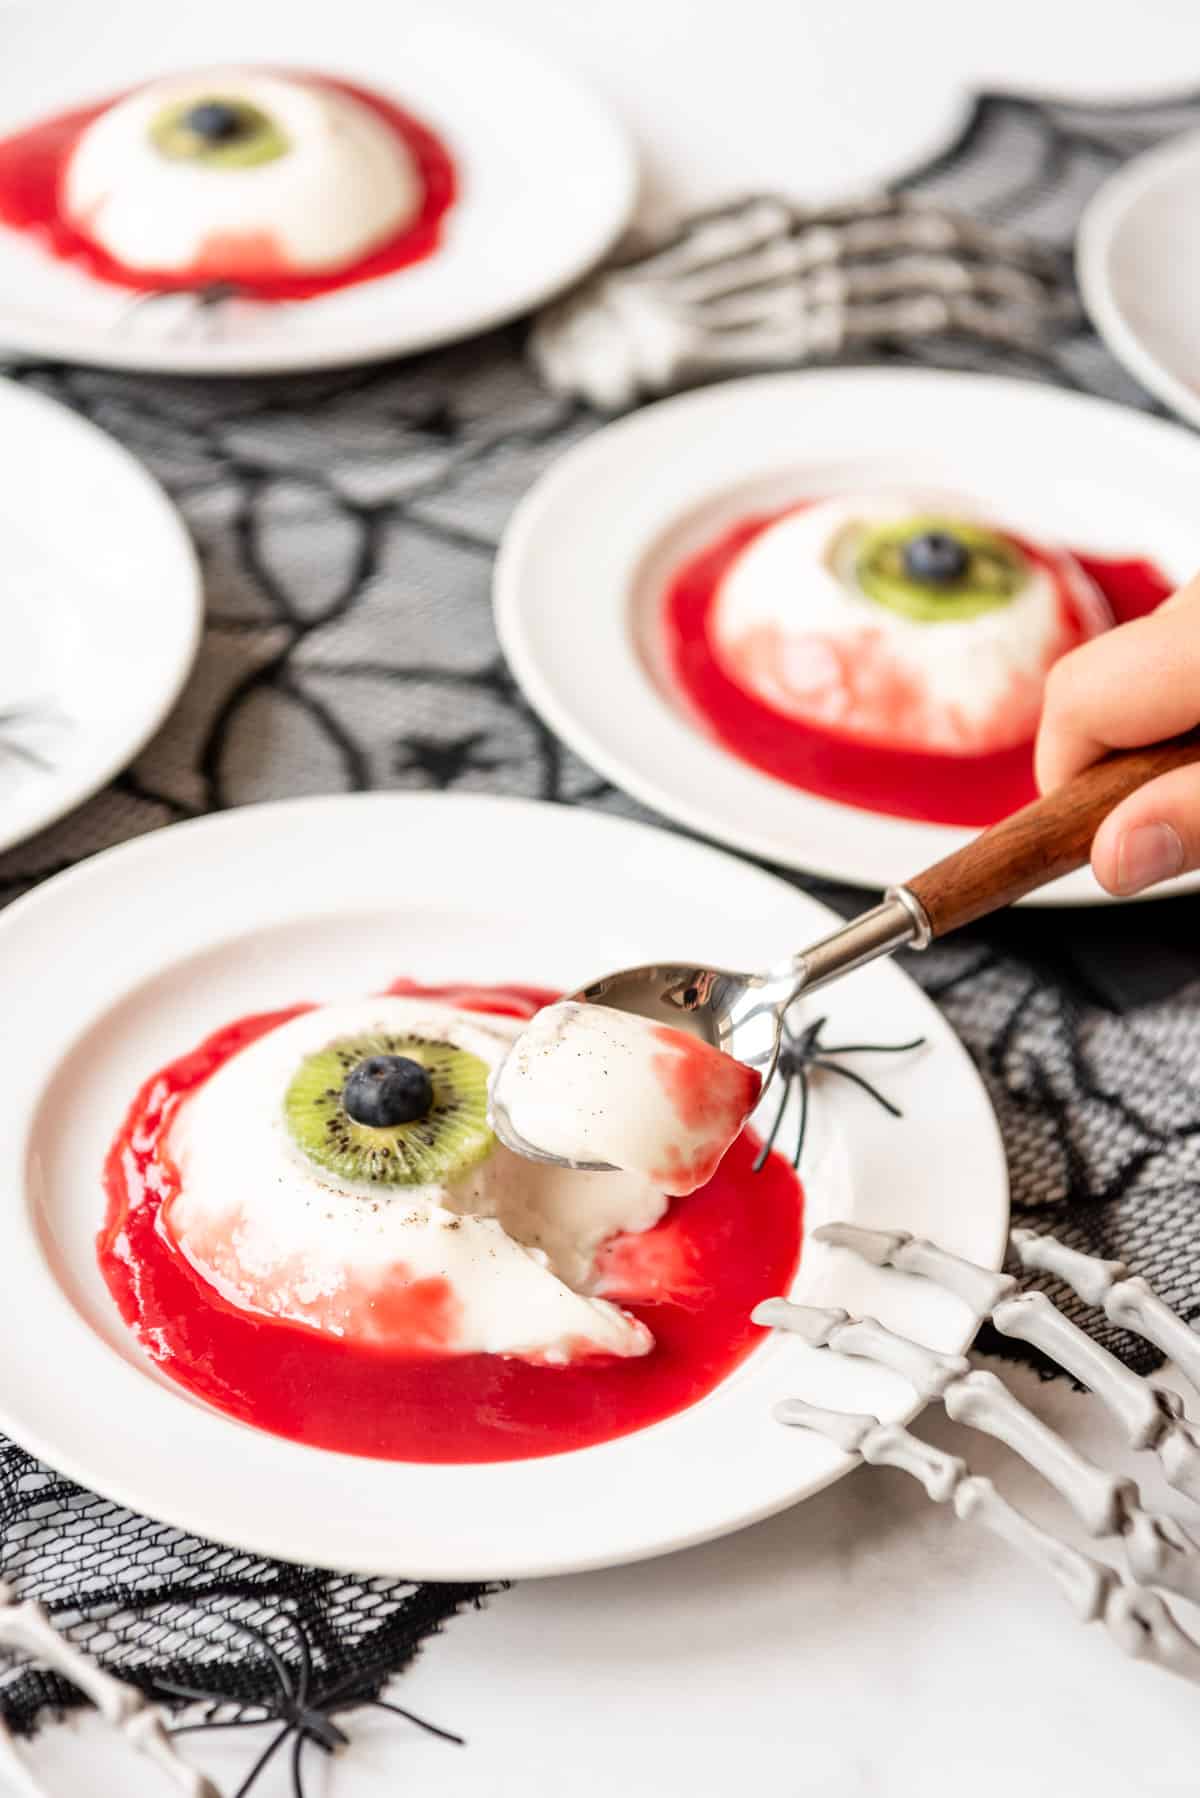 a spoon lifting up a bite of bloody panna cotta eyeball.